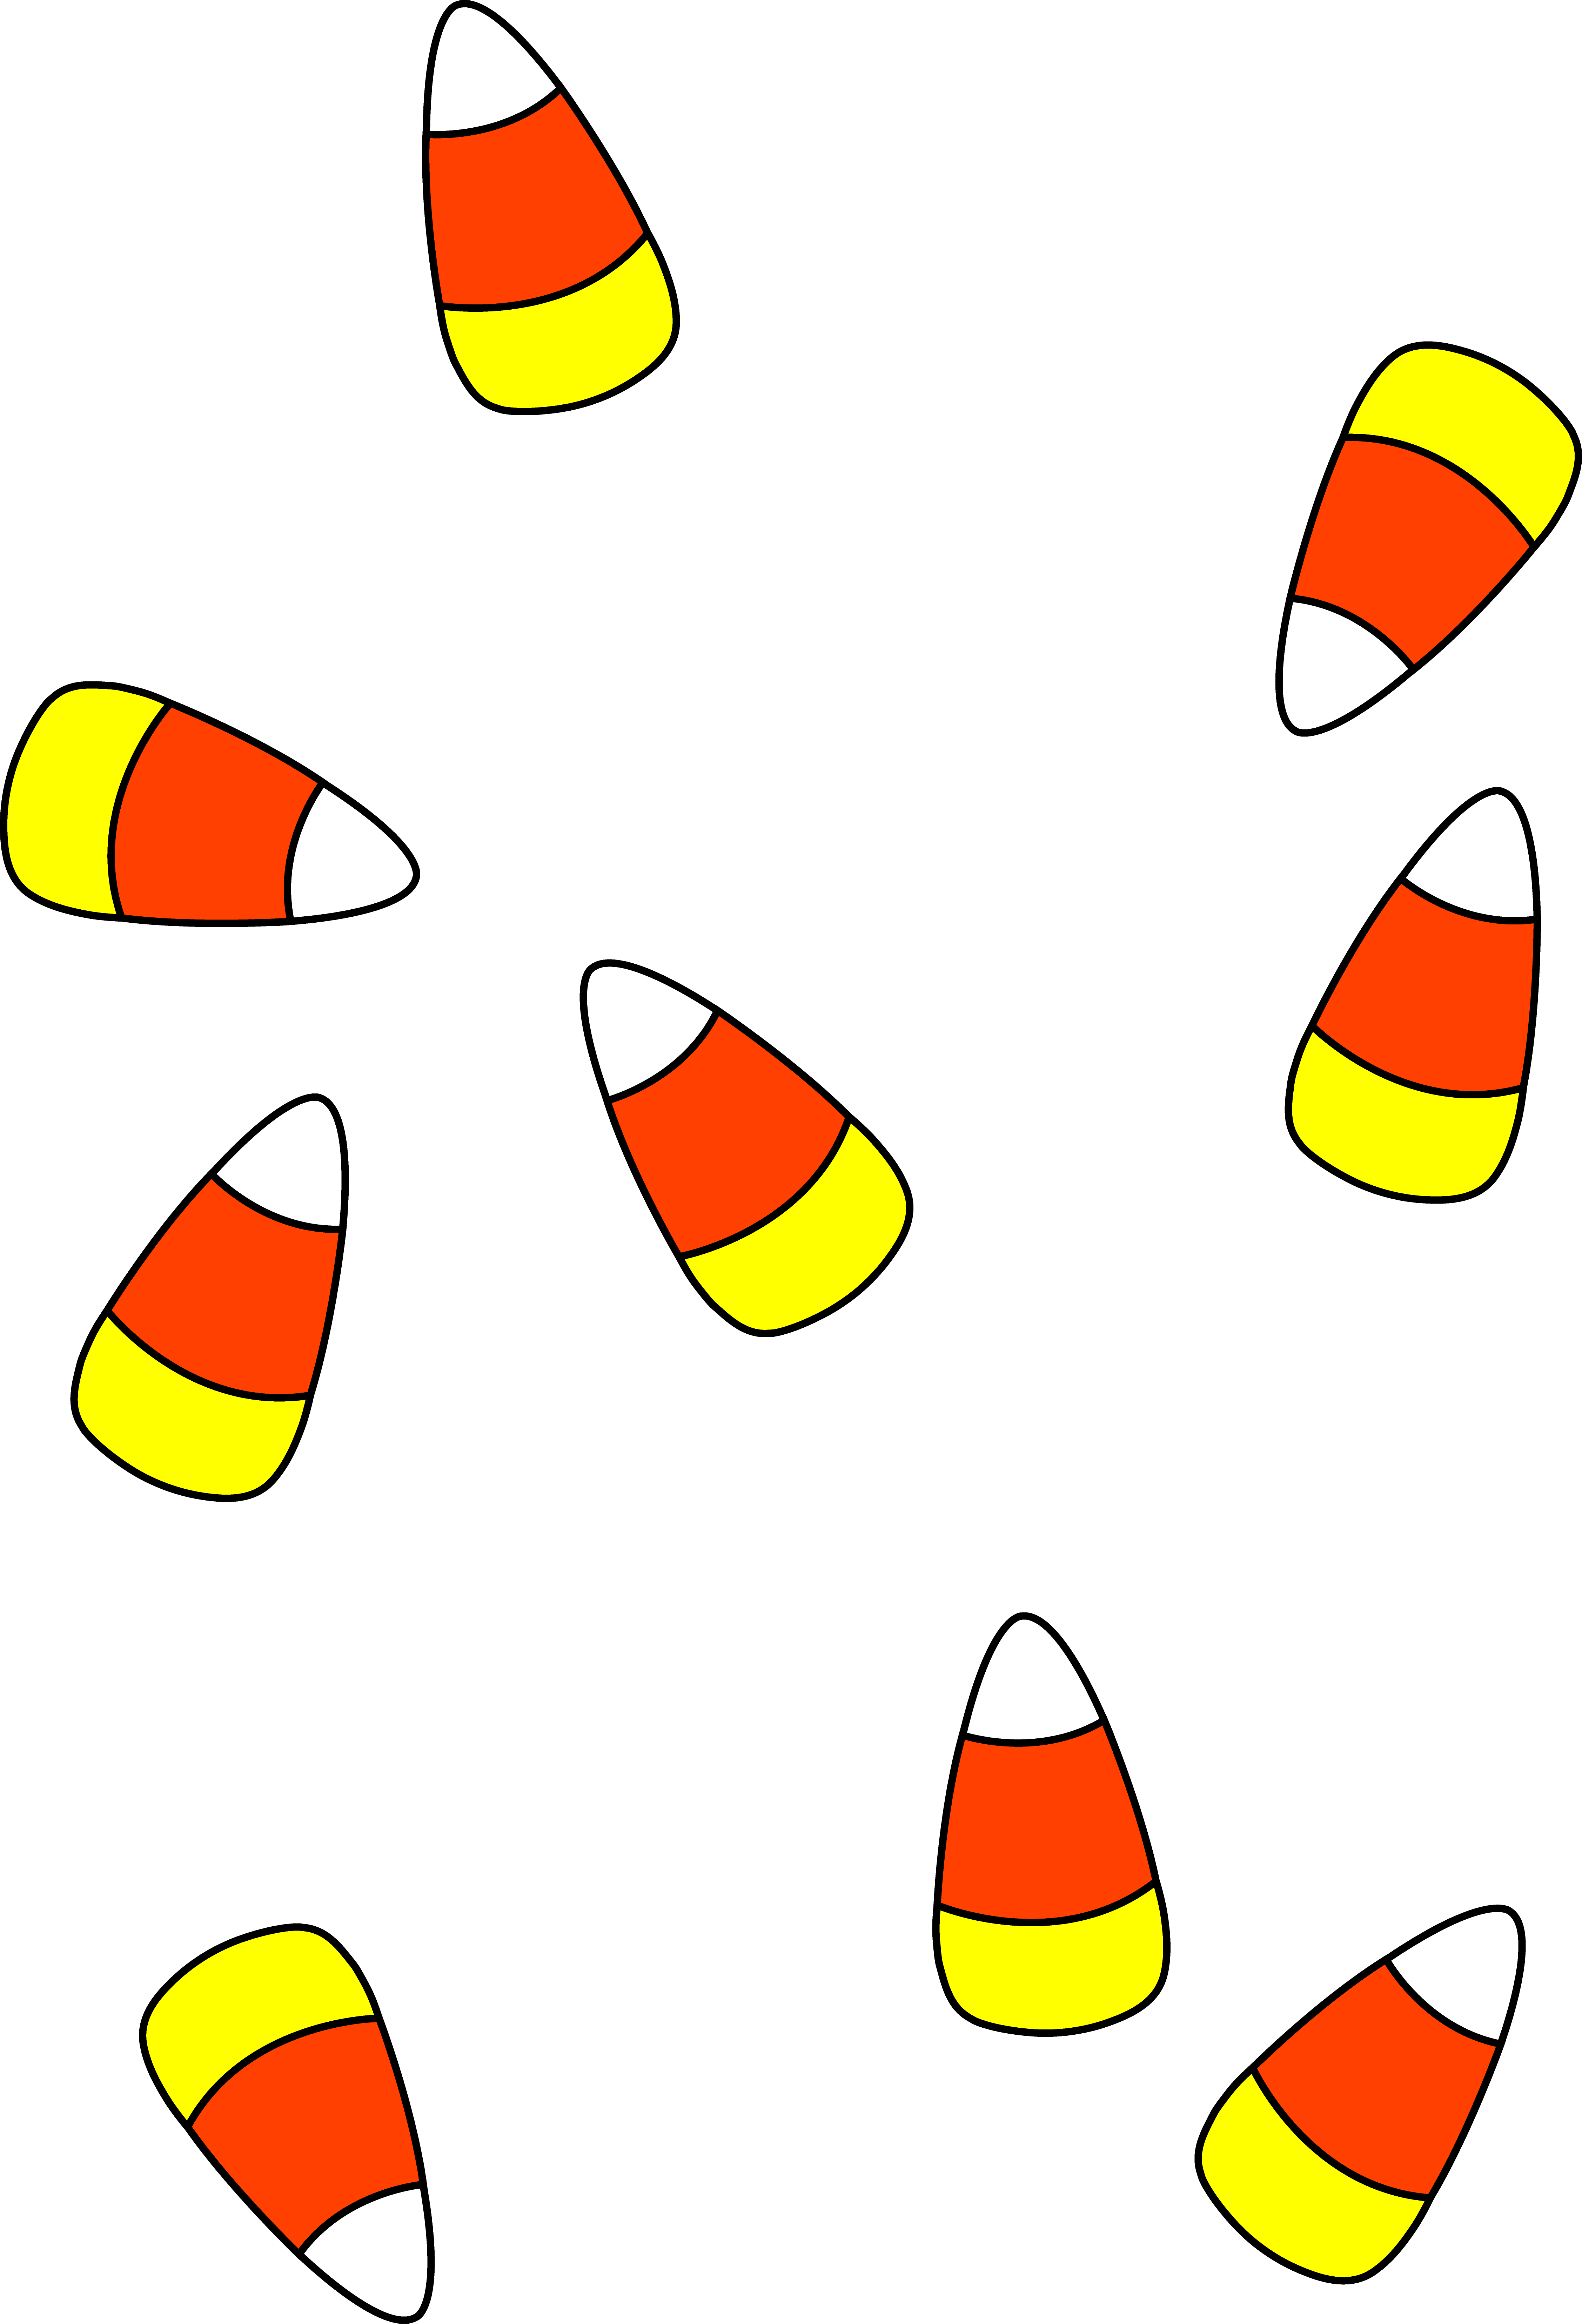 Scattered Halloween Candy Corn - Free Clip Art